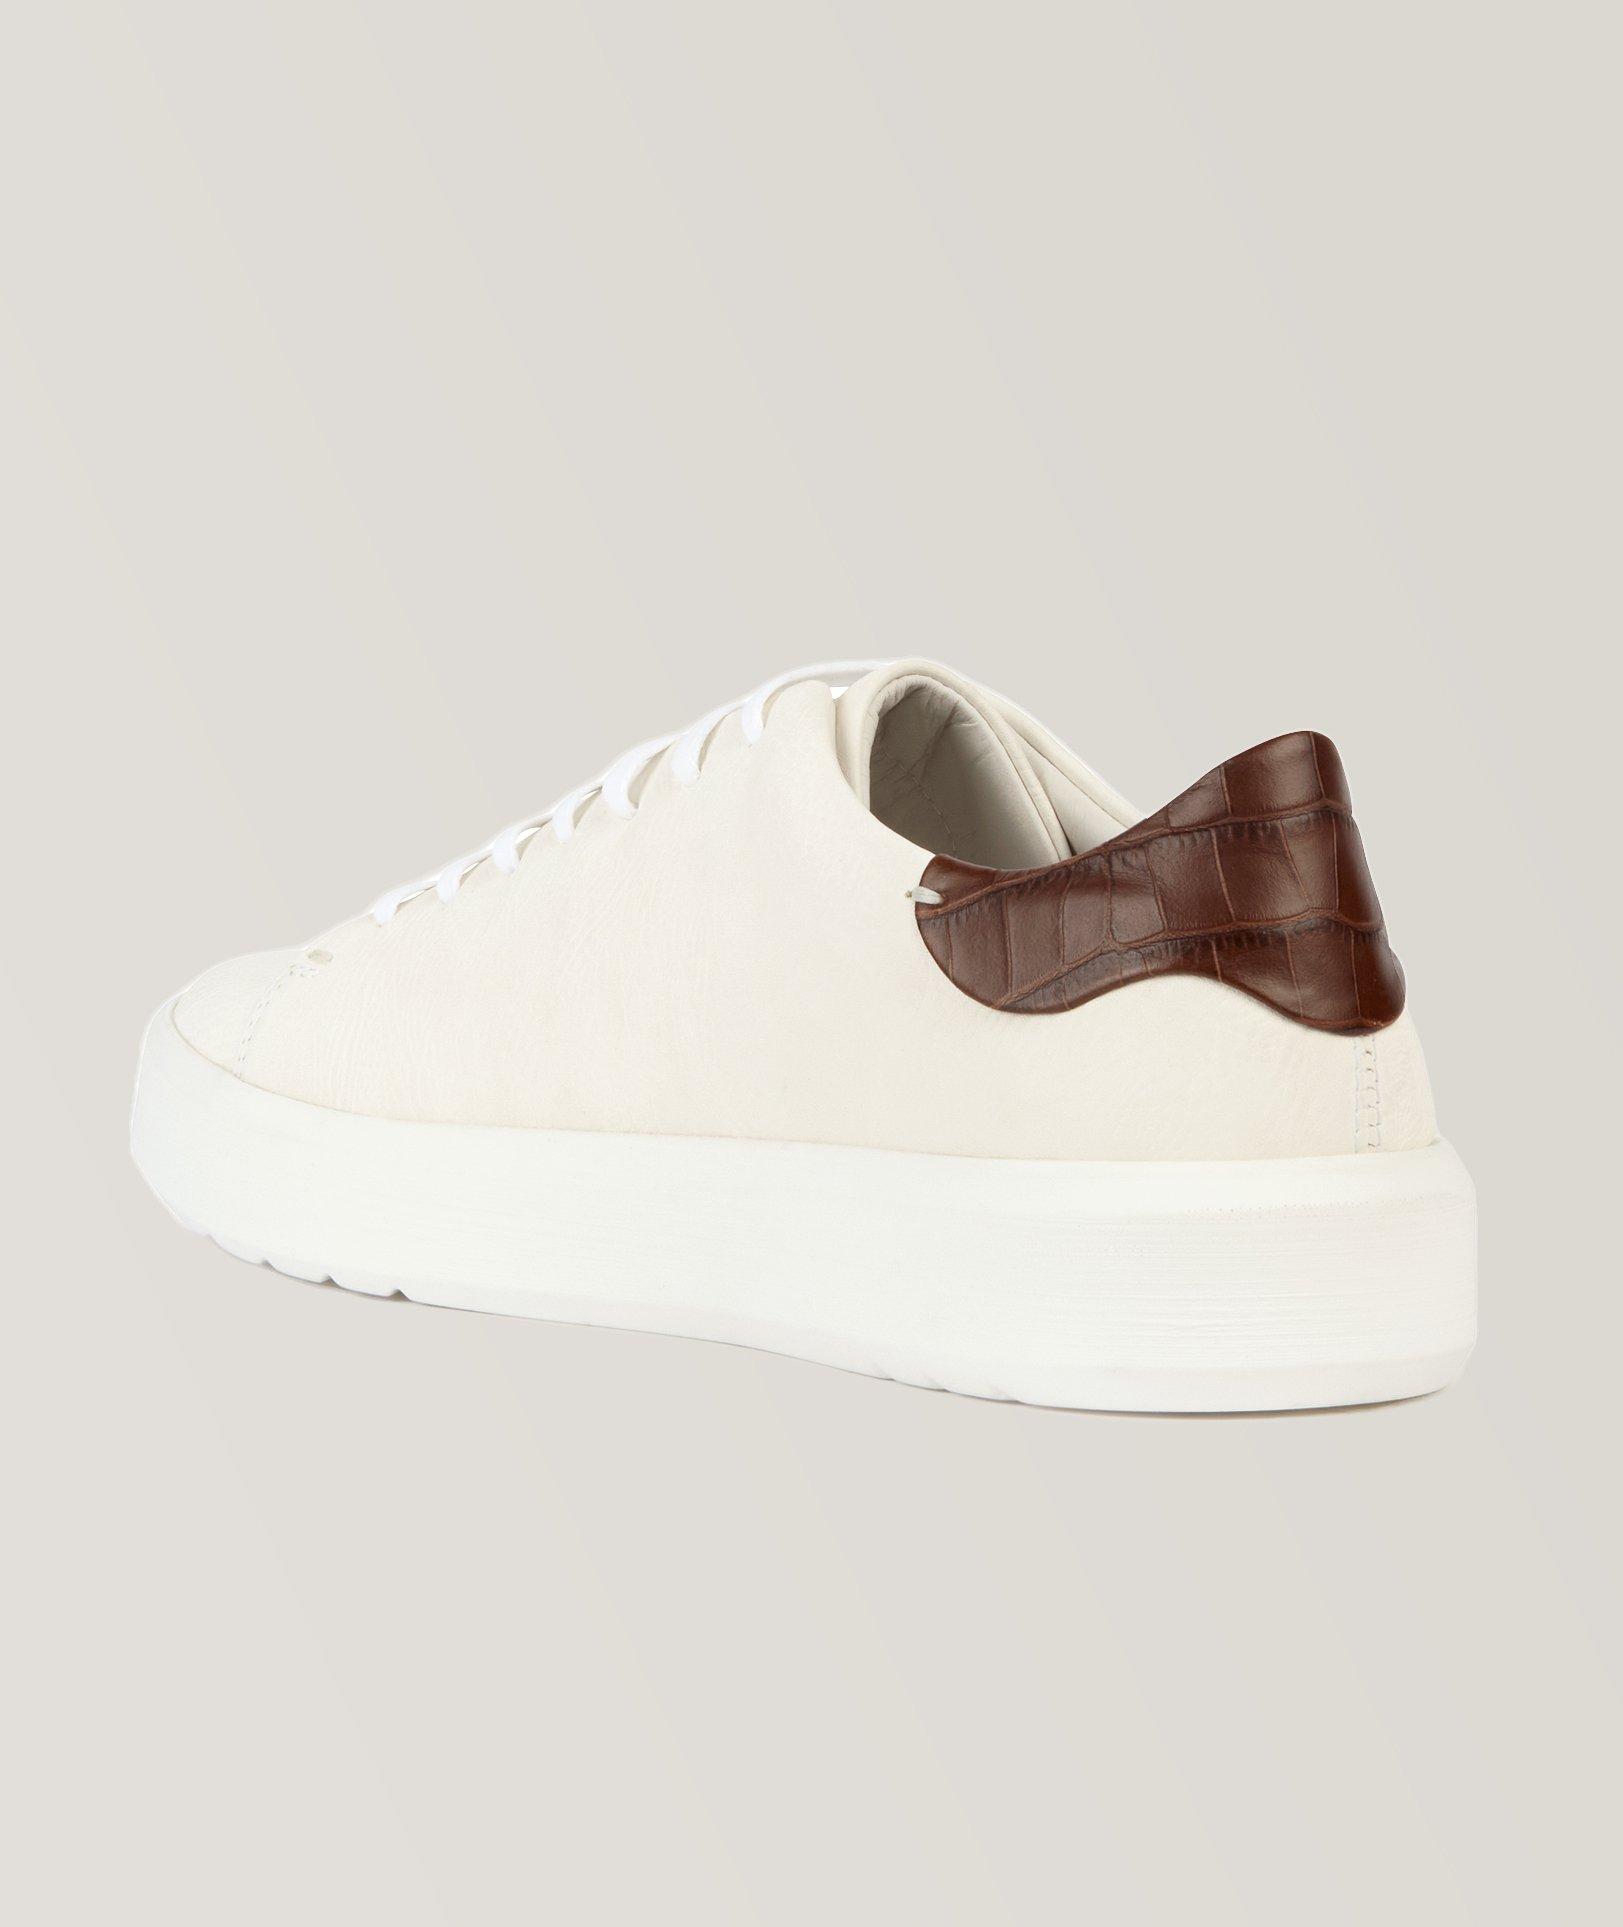 Velletri Mixed Materials Sneakers image 2